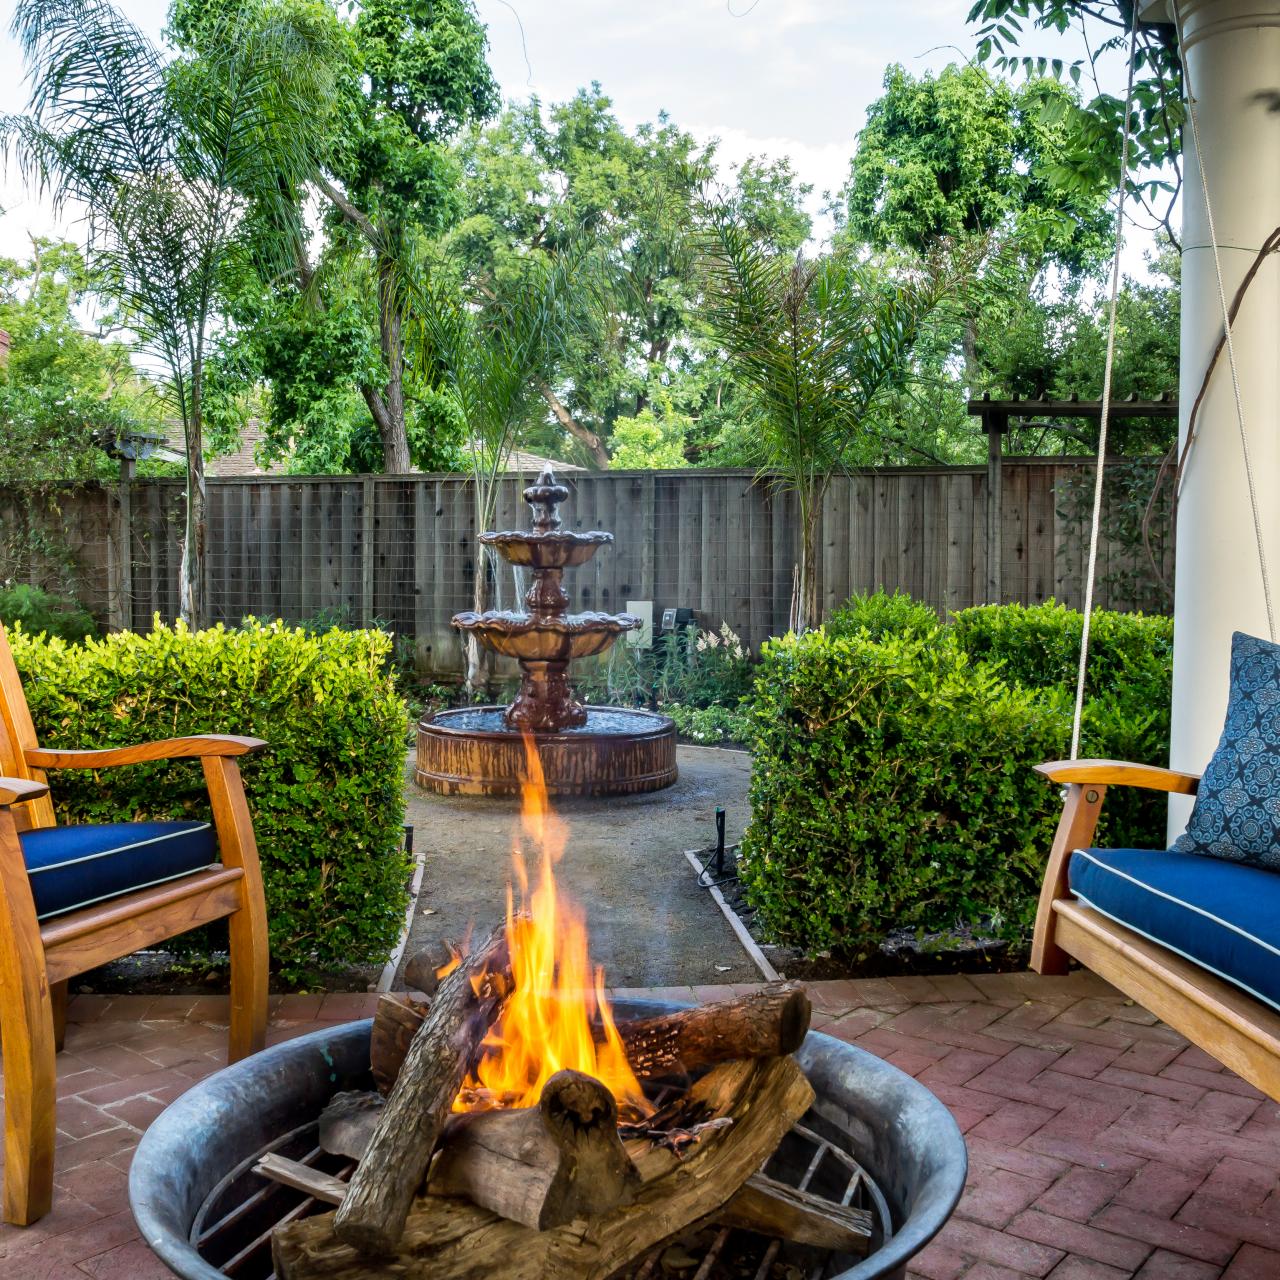 8 STUNNING Outdoor Fire Pits For Cooler Weather